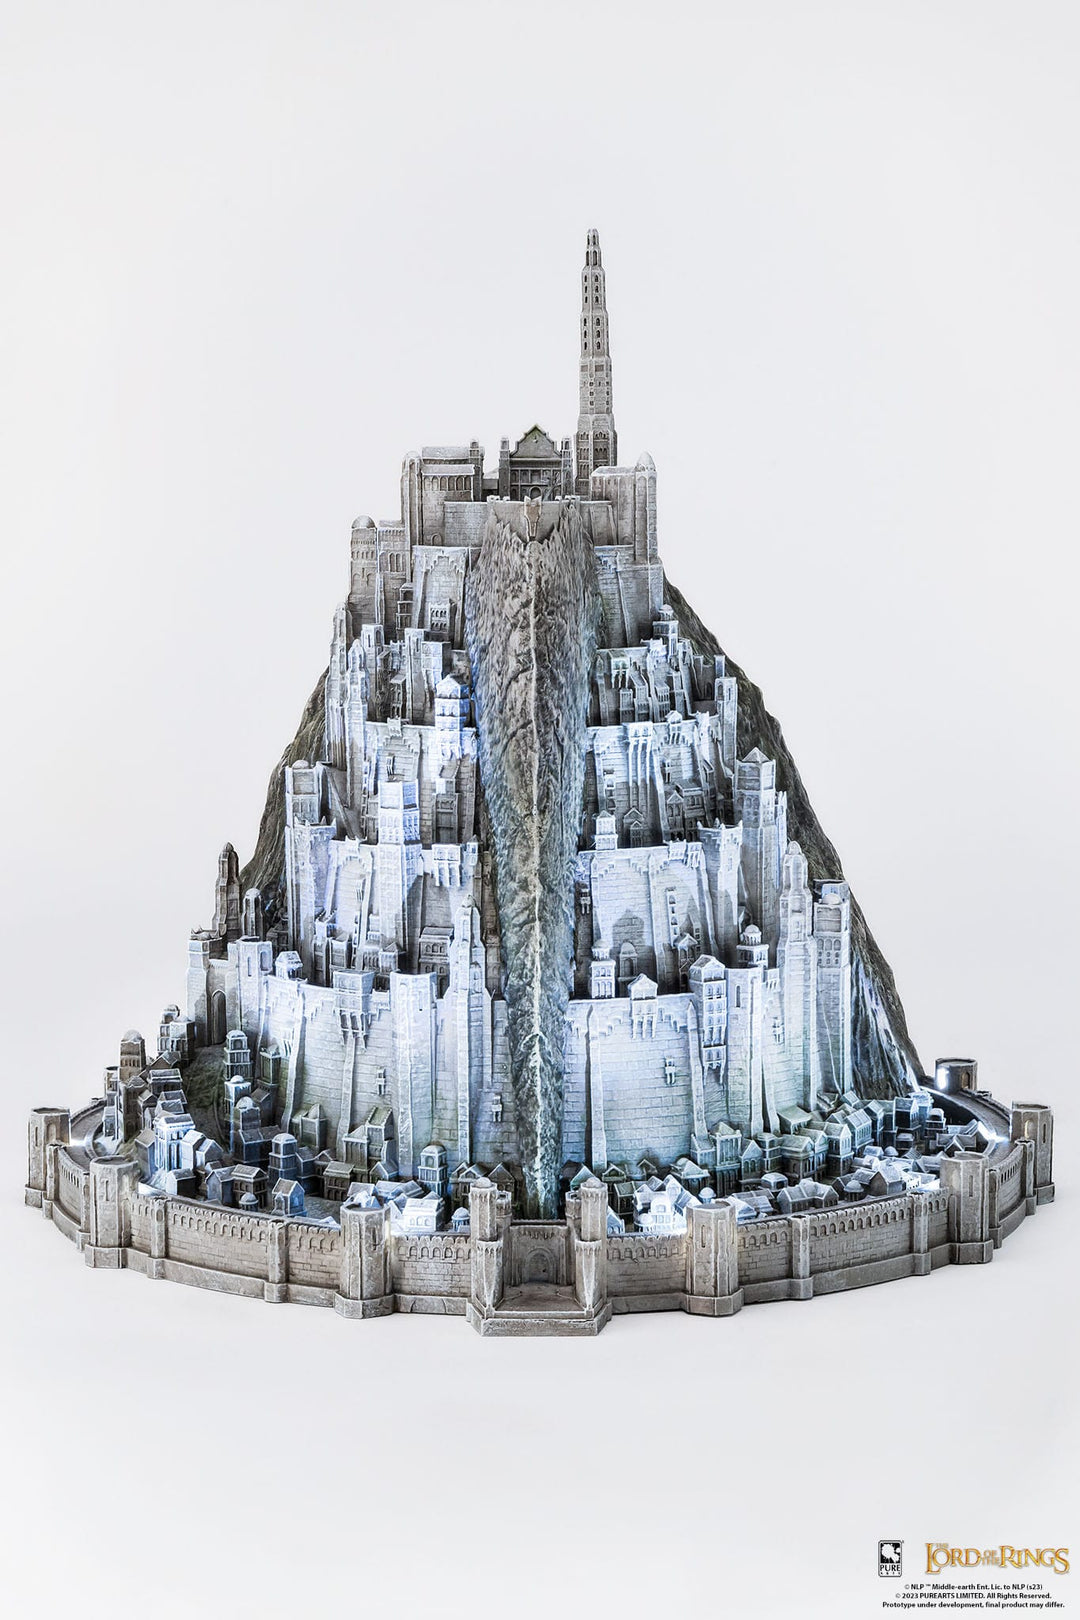 The Lord of the Rings Crown of Gondor 1/1 Scale Limited Edition Replica